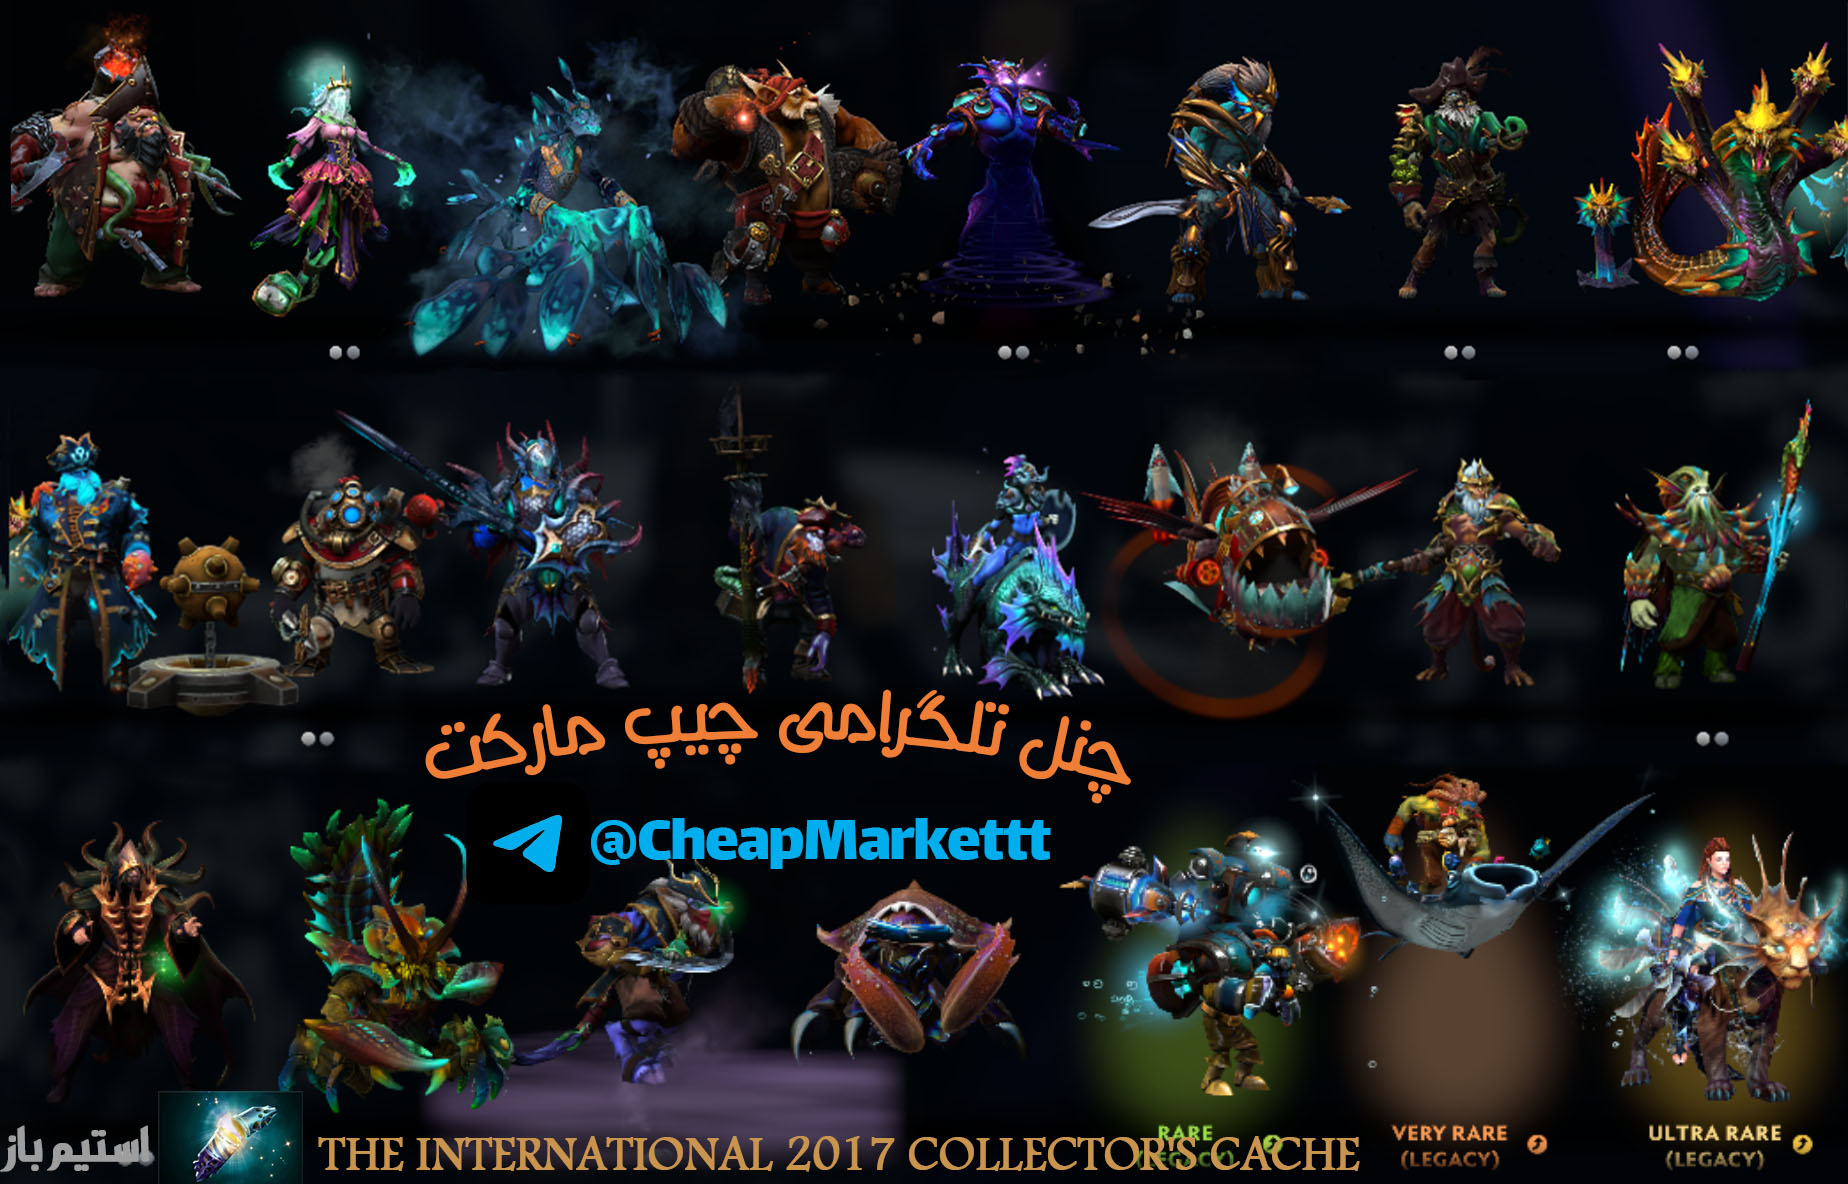 The International 2017 Collector's Cache